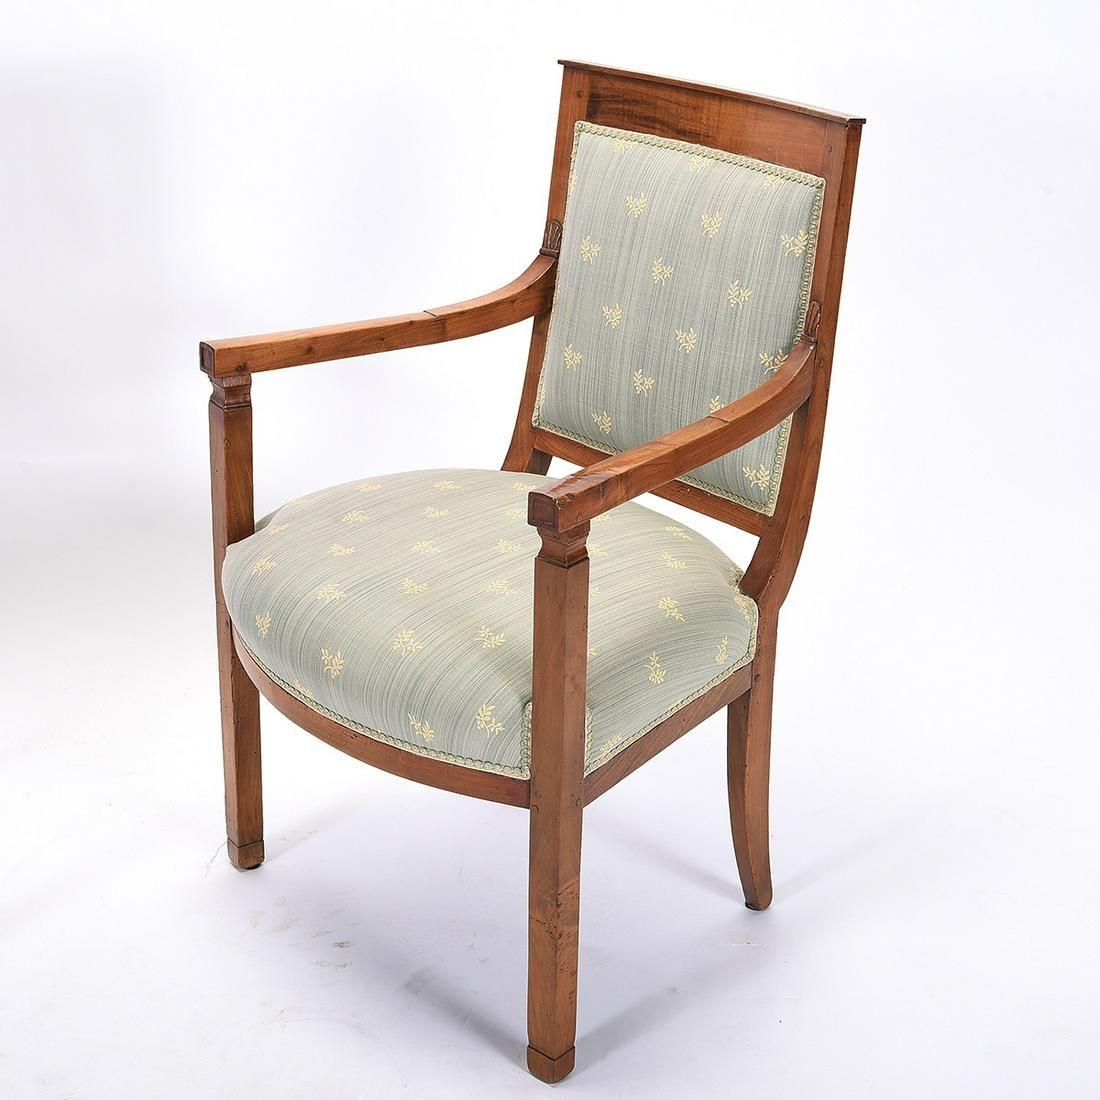 Pair of Circa 1800 Period French Directoire Fruitwood Fauteuil Armchairs. Upholstery in light blue striated fabric with white sprigs. Coil spring seat foundation. Aged finish.